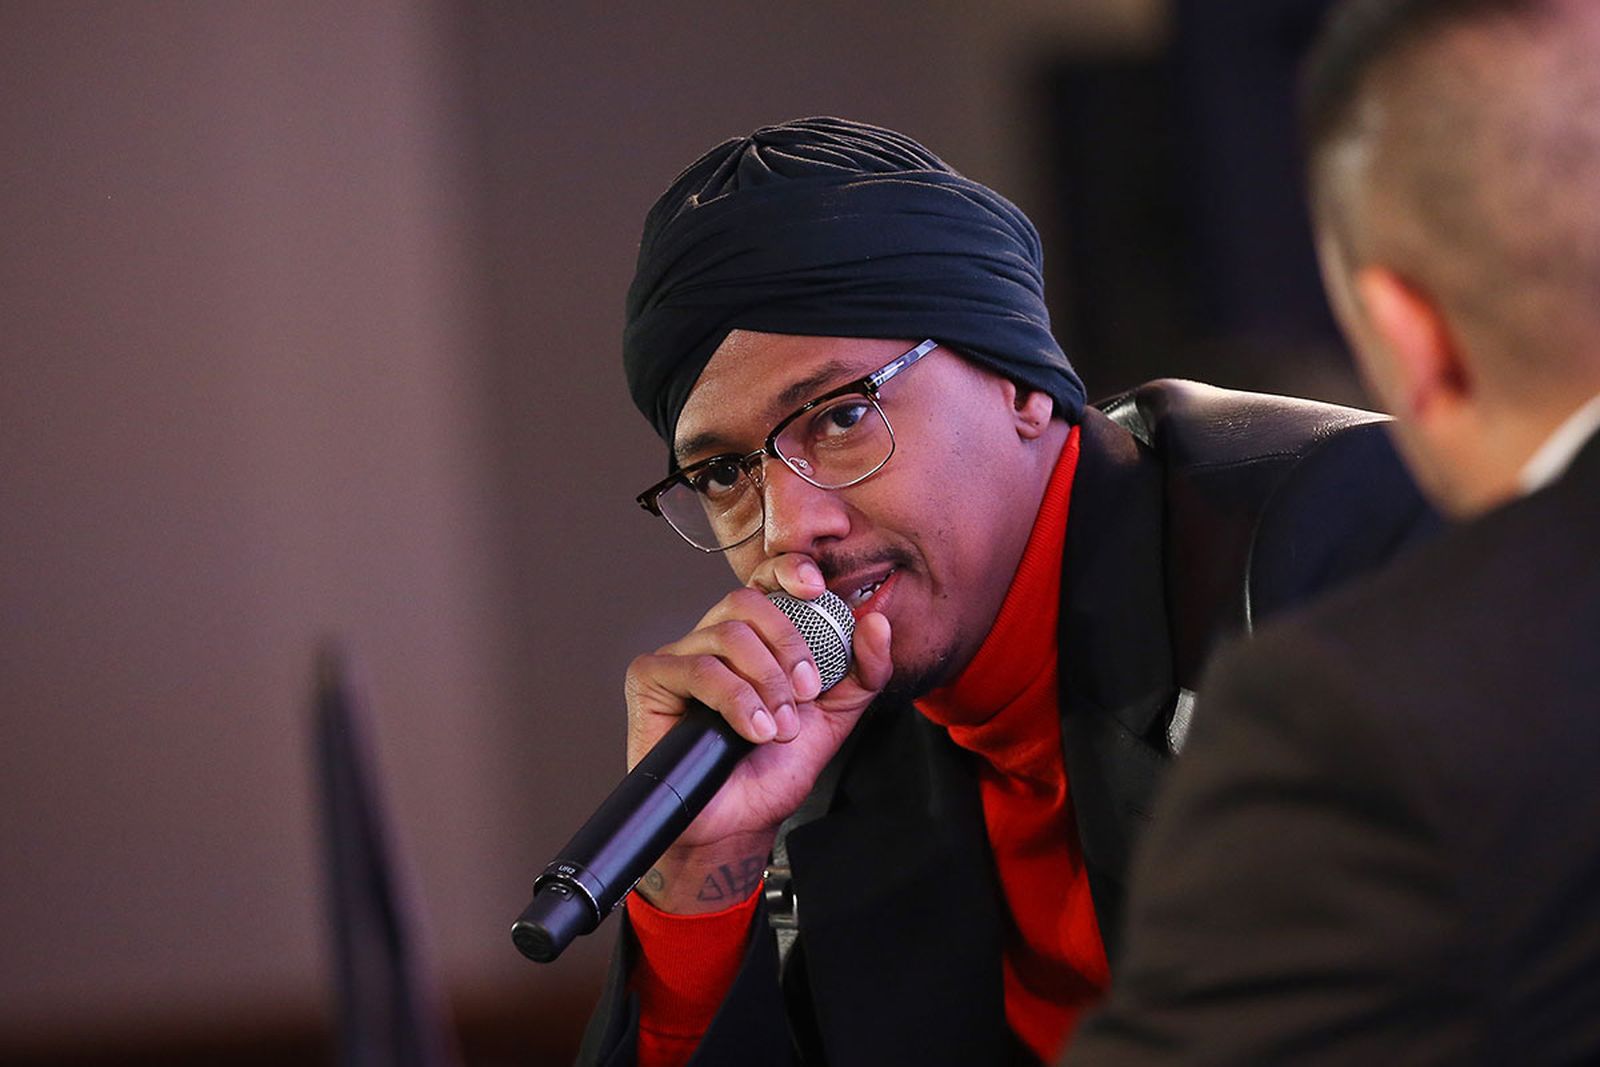 nick cannon speaks onstage during the Hollywood Chamber of Commerce 2019